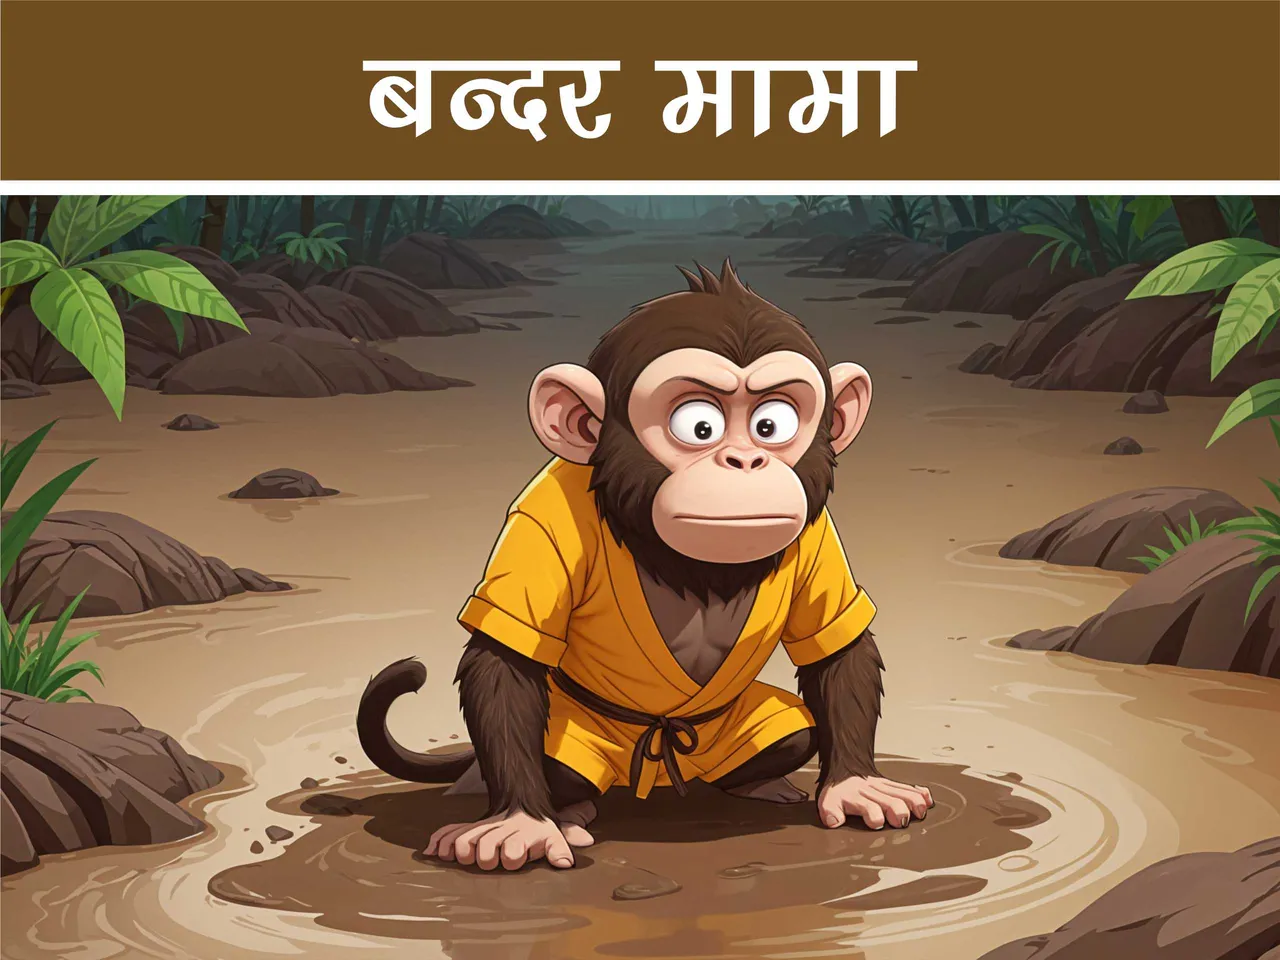 cartoon image of a monkey in mud pit